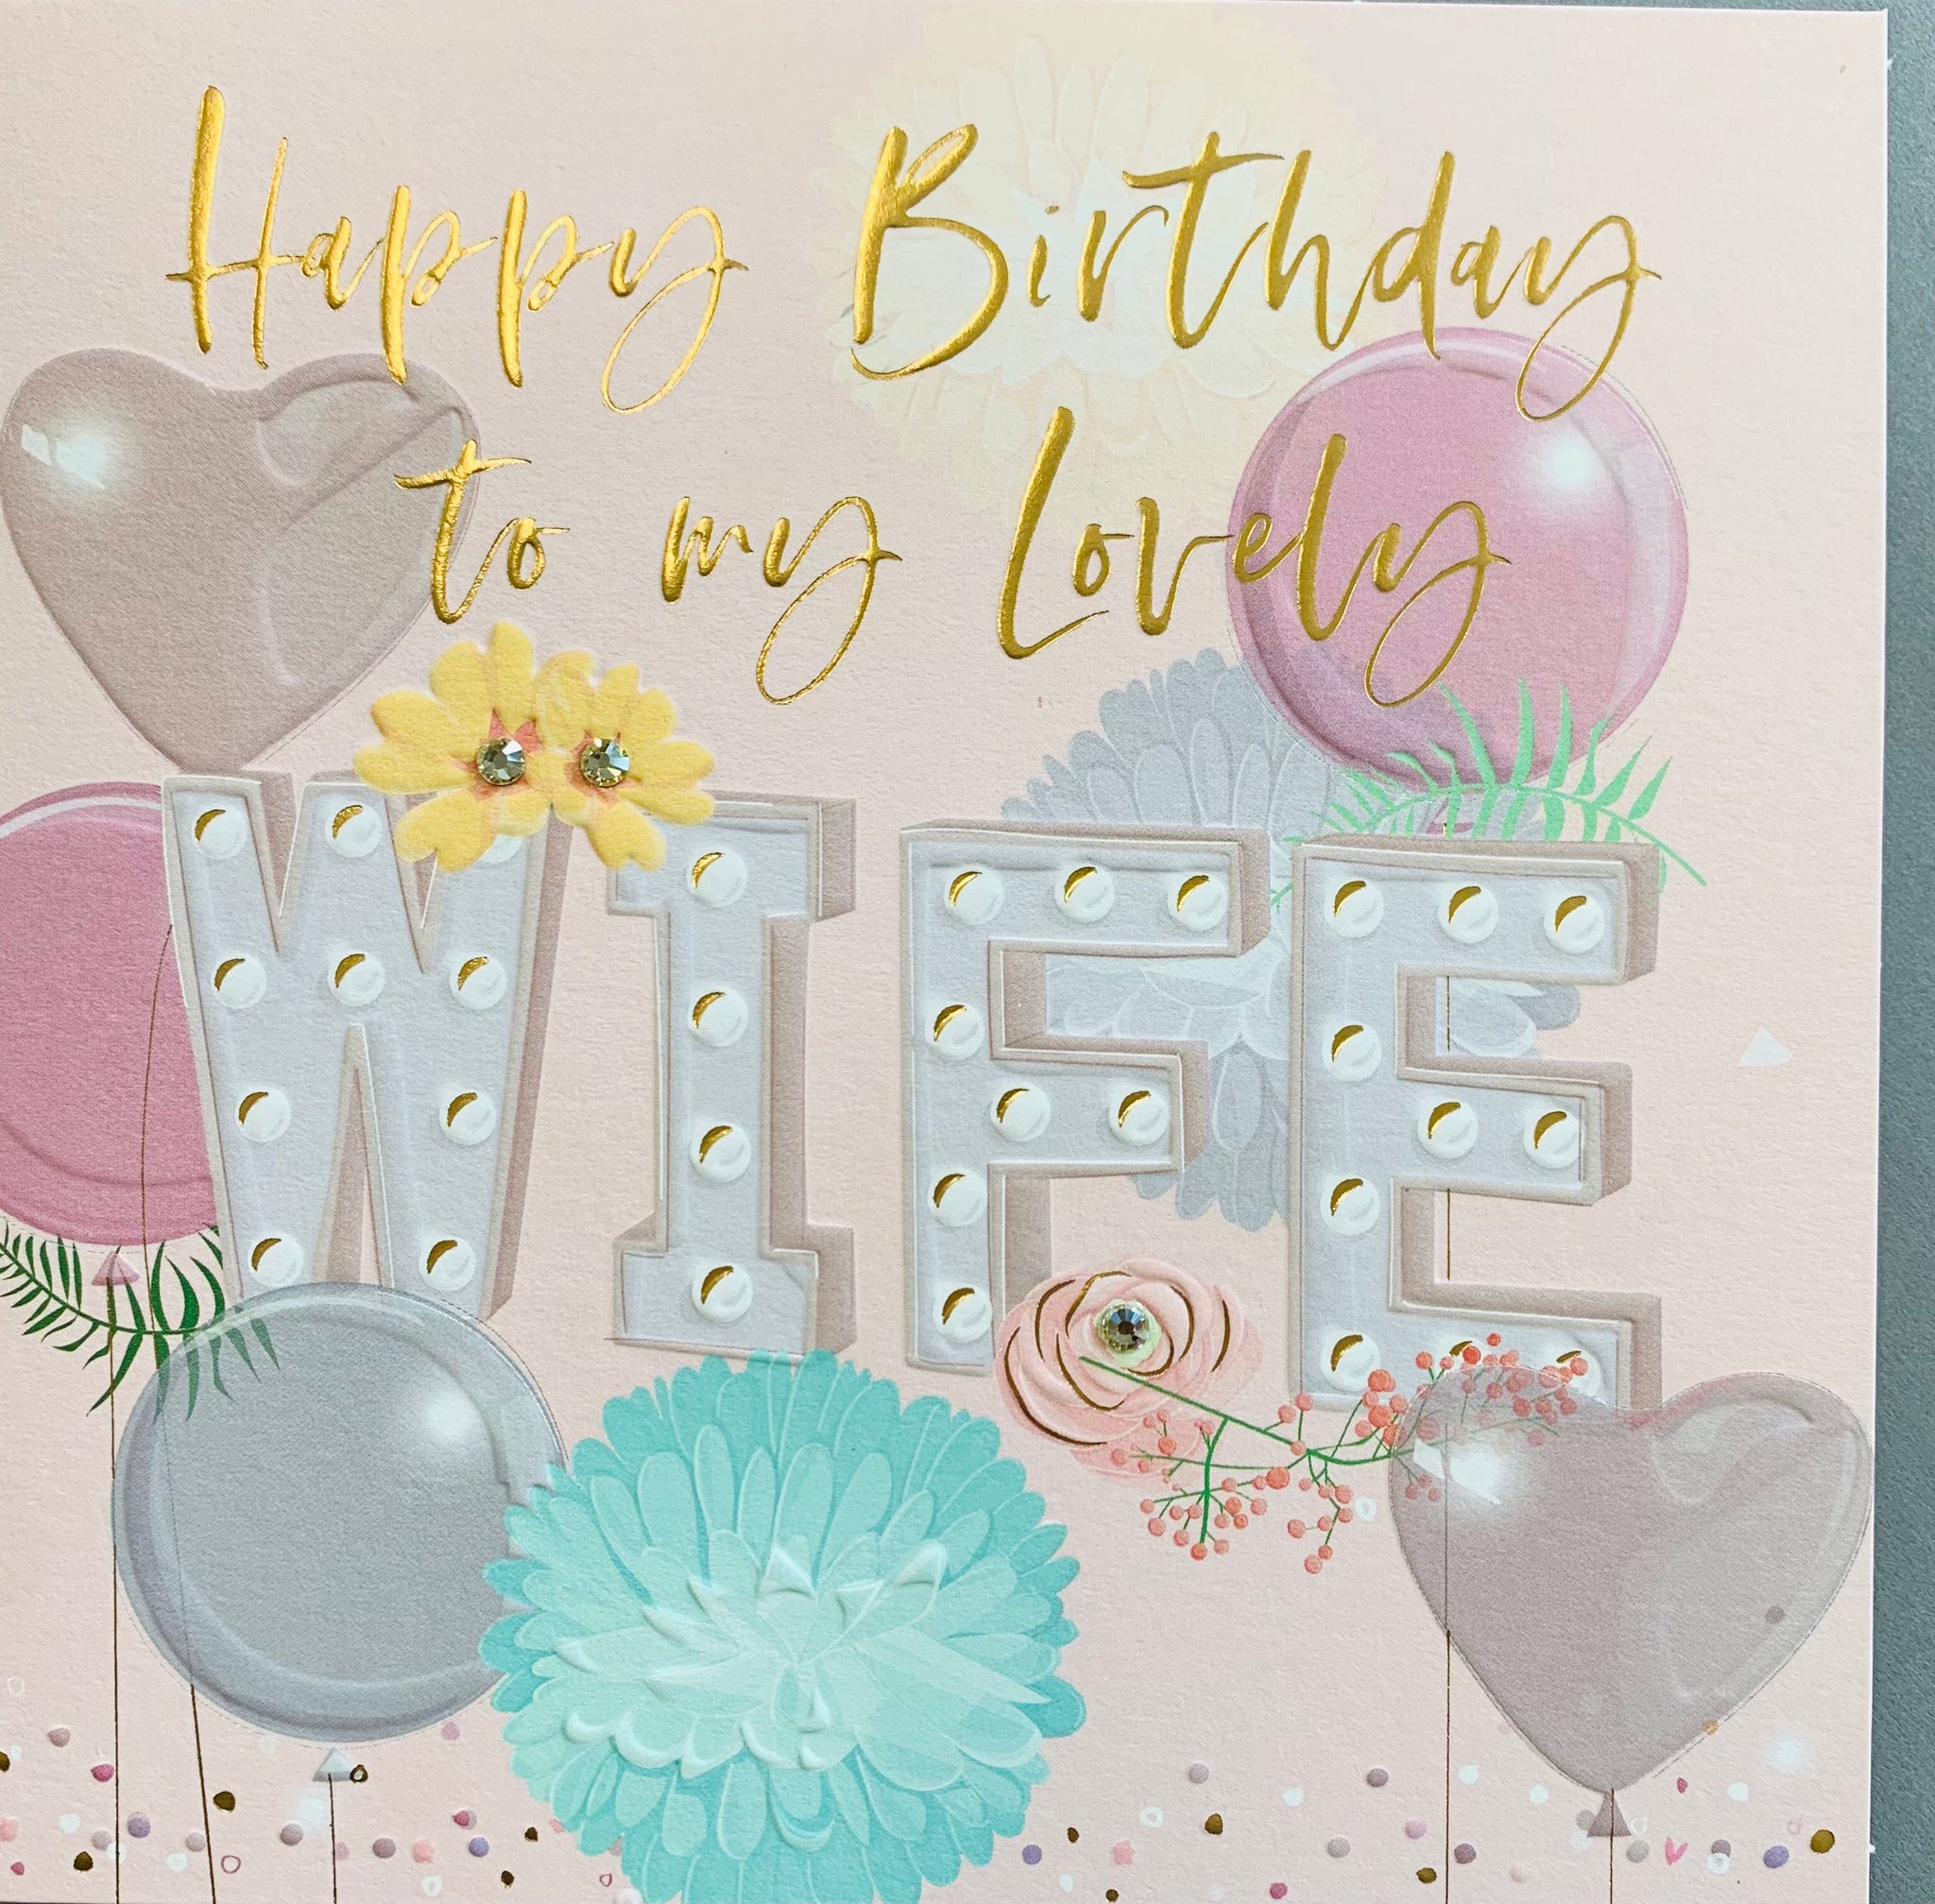 Wife birthday card from Belly button designs